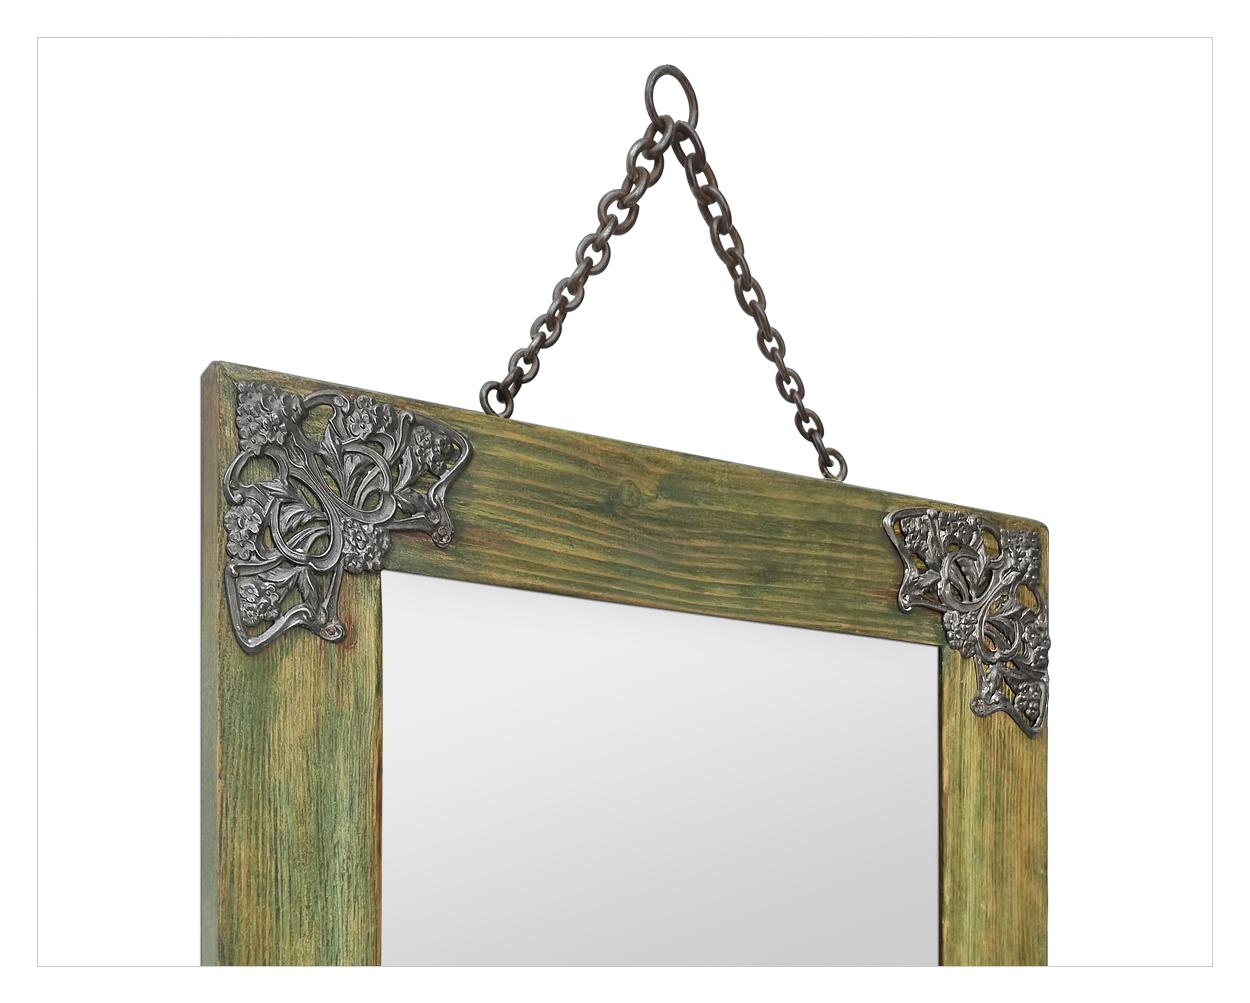 Early 20th Century Small Antique French Mirror Art Nouveau Period, circa 1900 For Sale